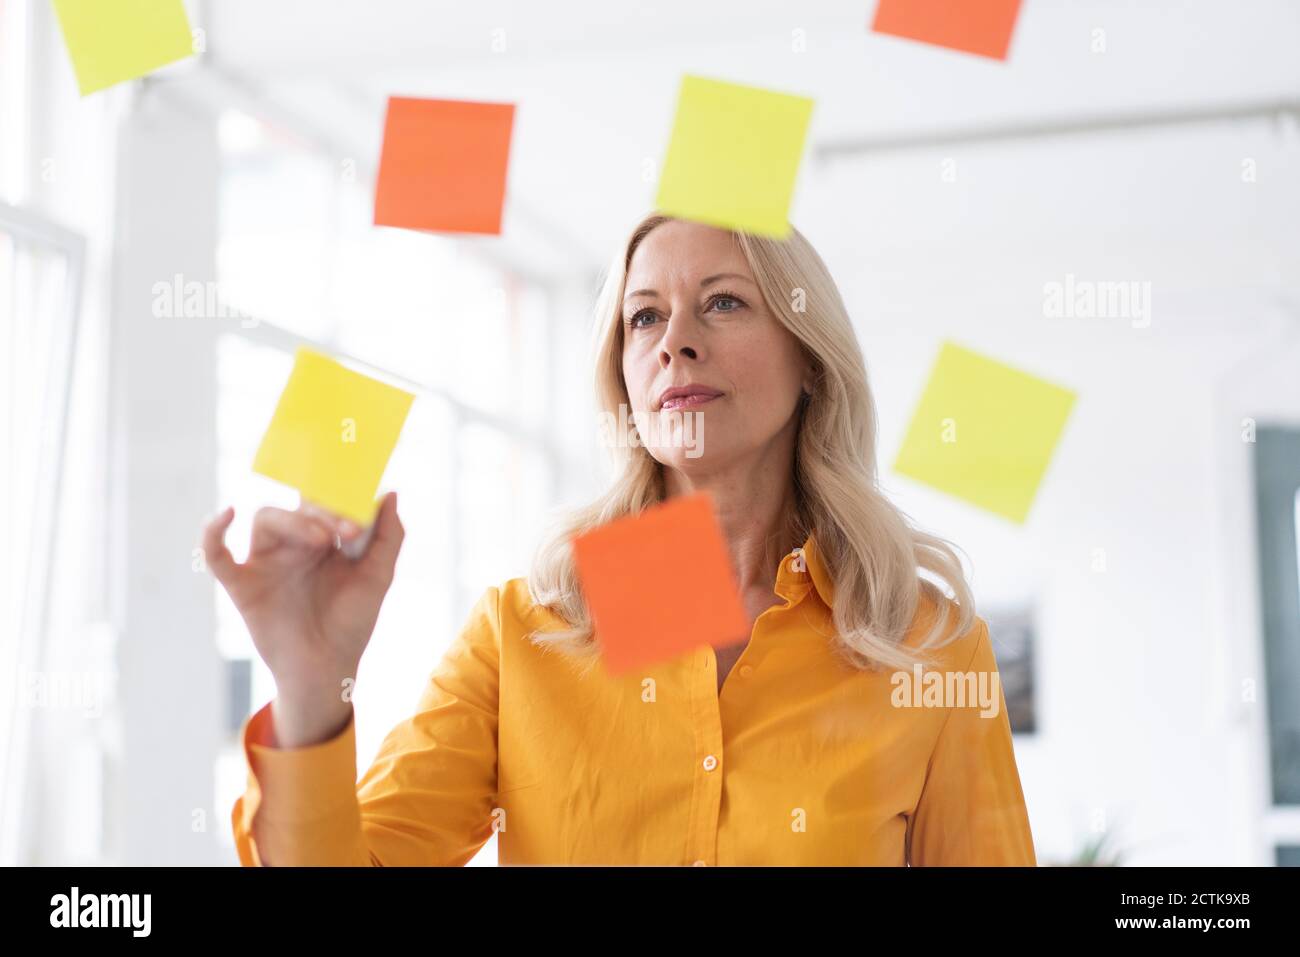 Businesswoman planning over adhesive notes stuck on window in home office Stock Photo